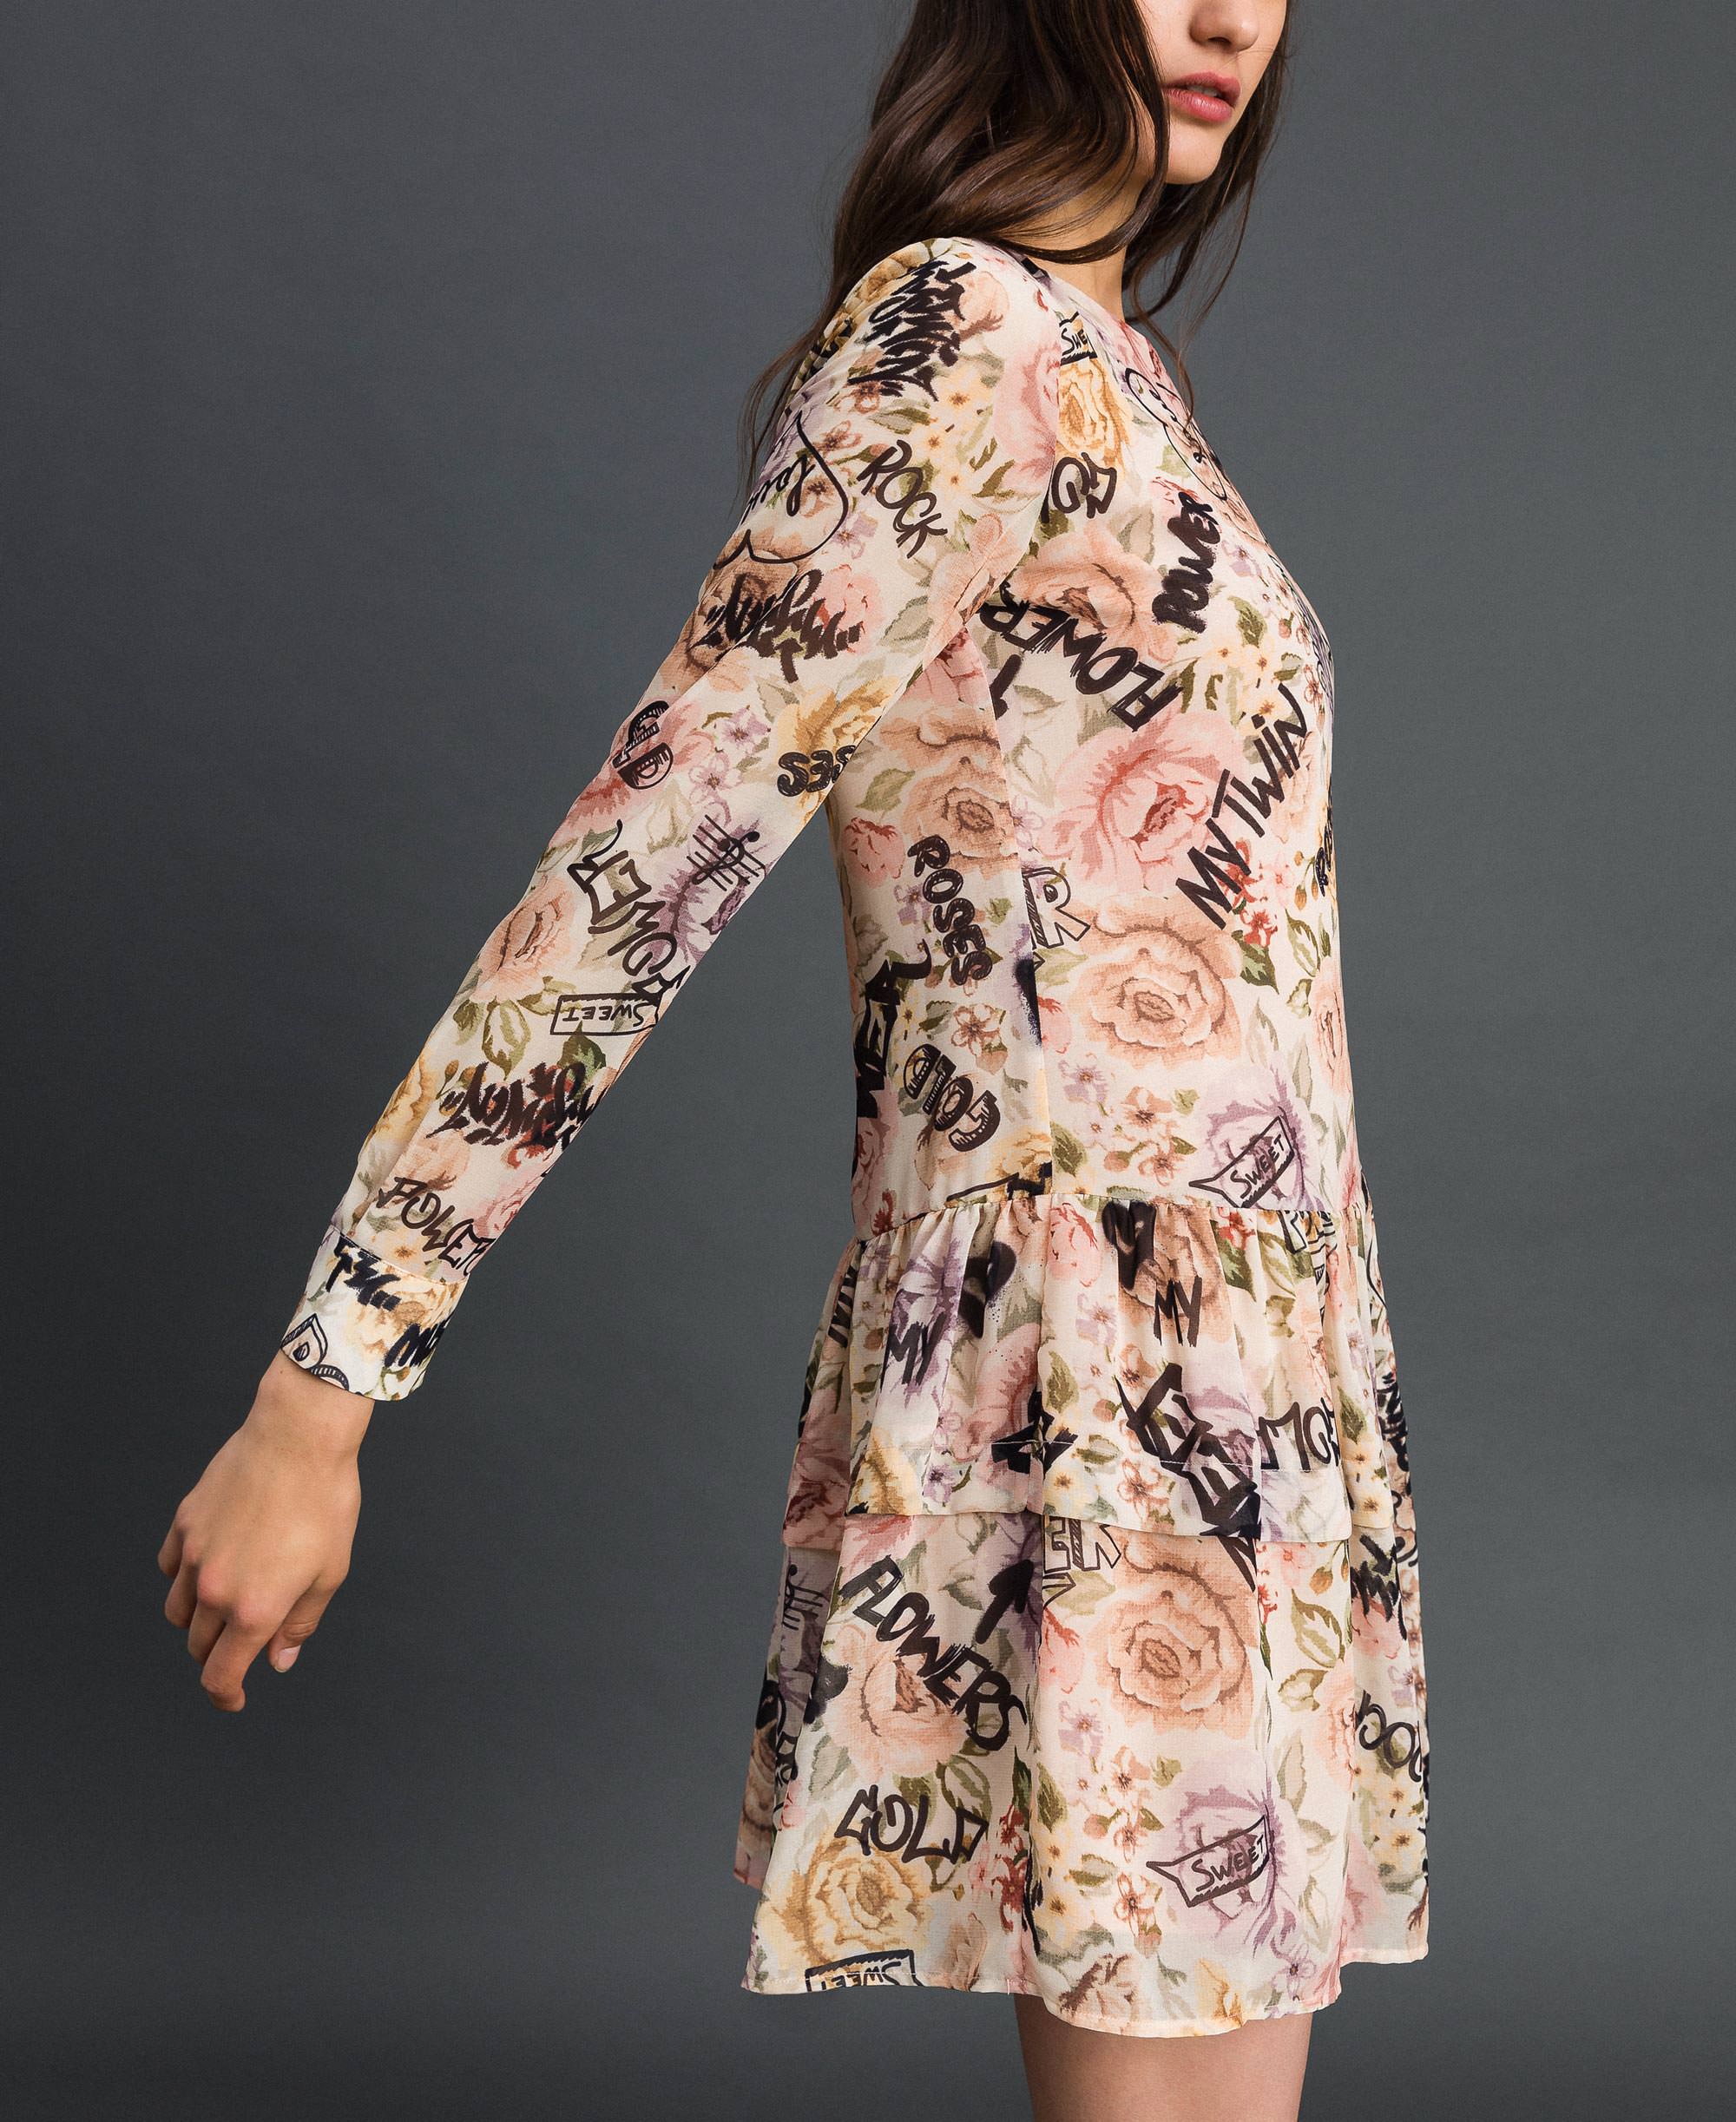 Dress with floral and graffiti print